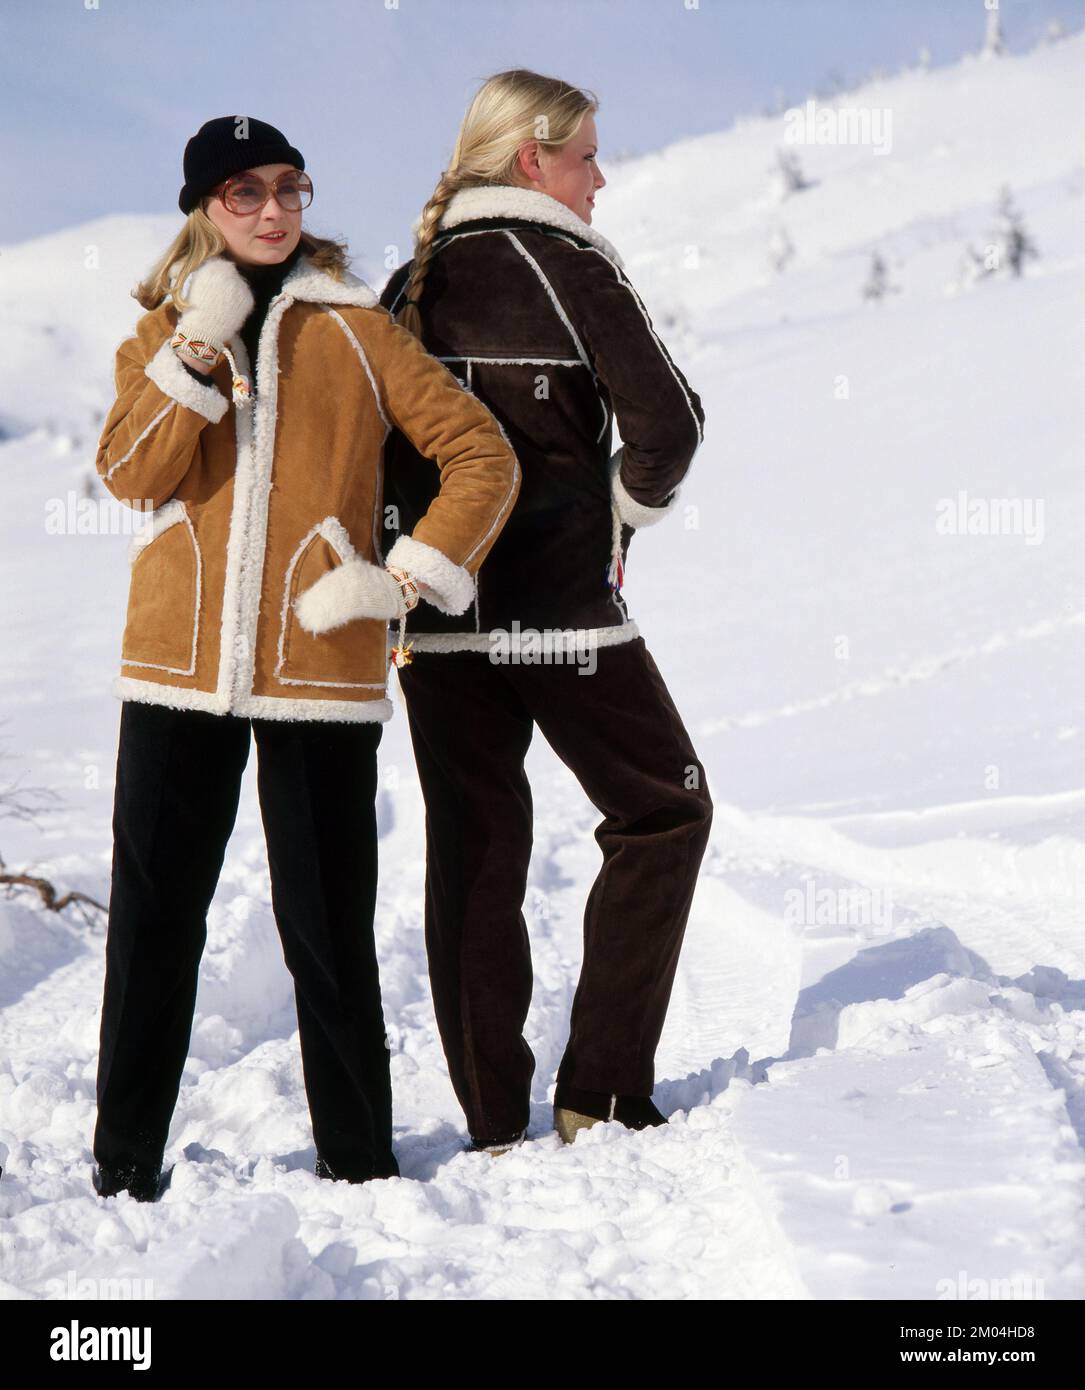 Fashion in the 1980s. Two young models standing in the snow for a photo shoot. They are wearing warm winter jackets and trousers. Sweden march 1980 Stock Photo